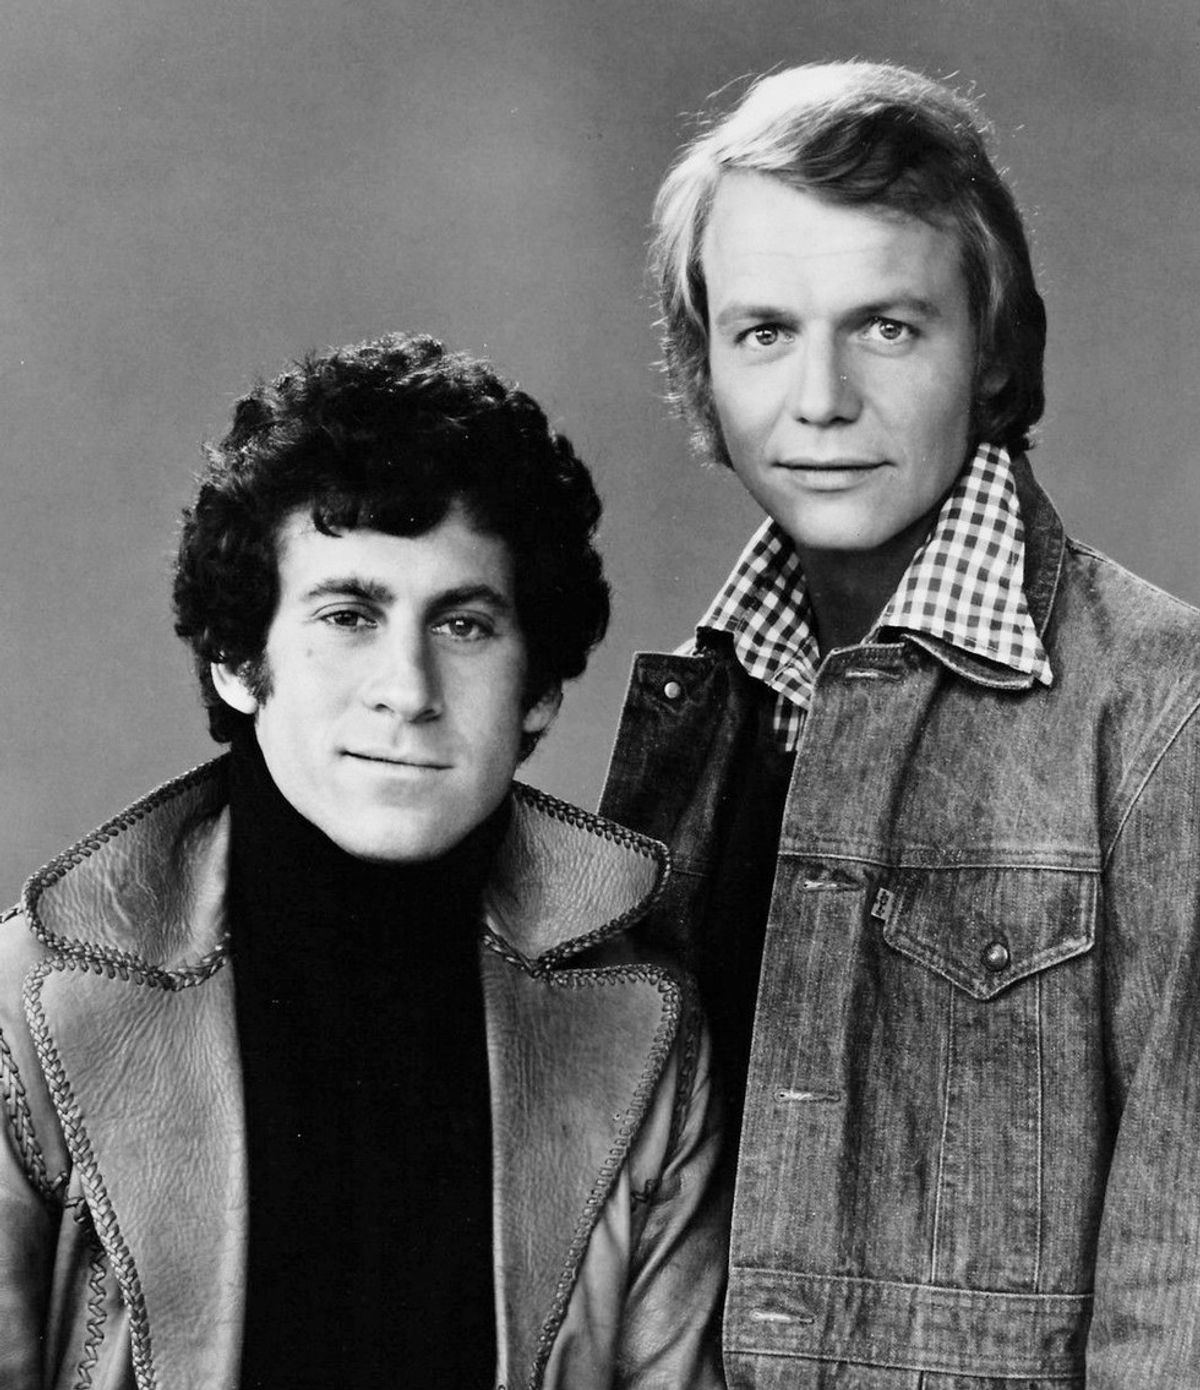 Three Things I Learned From Starsky And Hutch